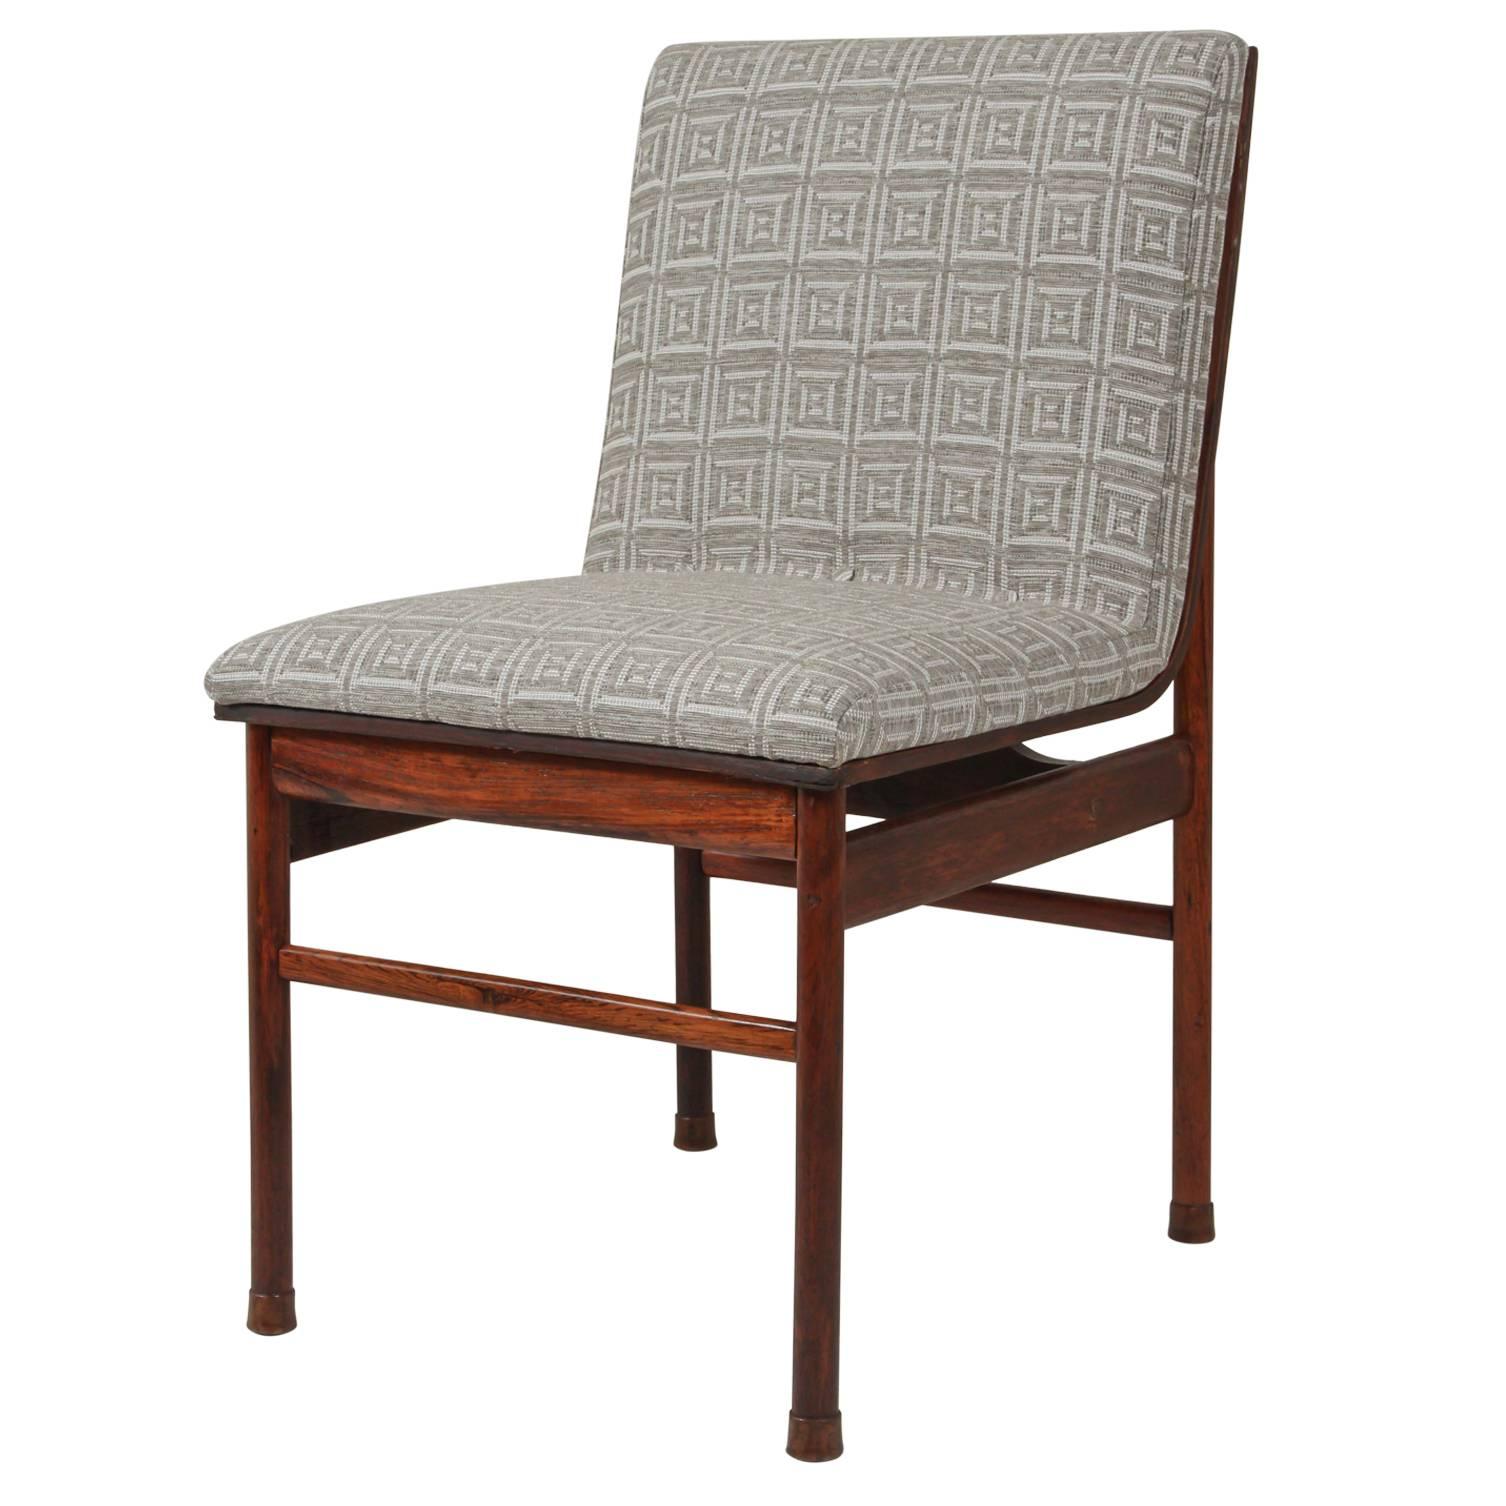 Brazilian rosewood Mid-Century dining chairs upholstered with indoor/outdoor fabric by Christopher Farr.